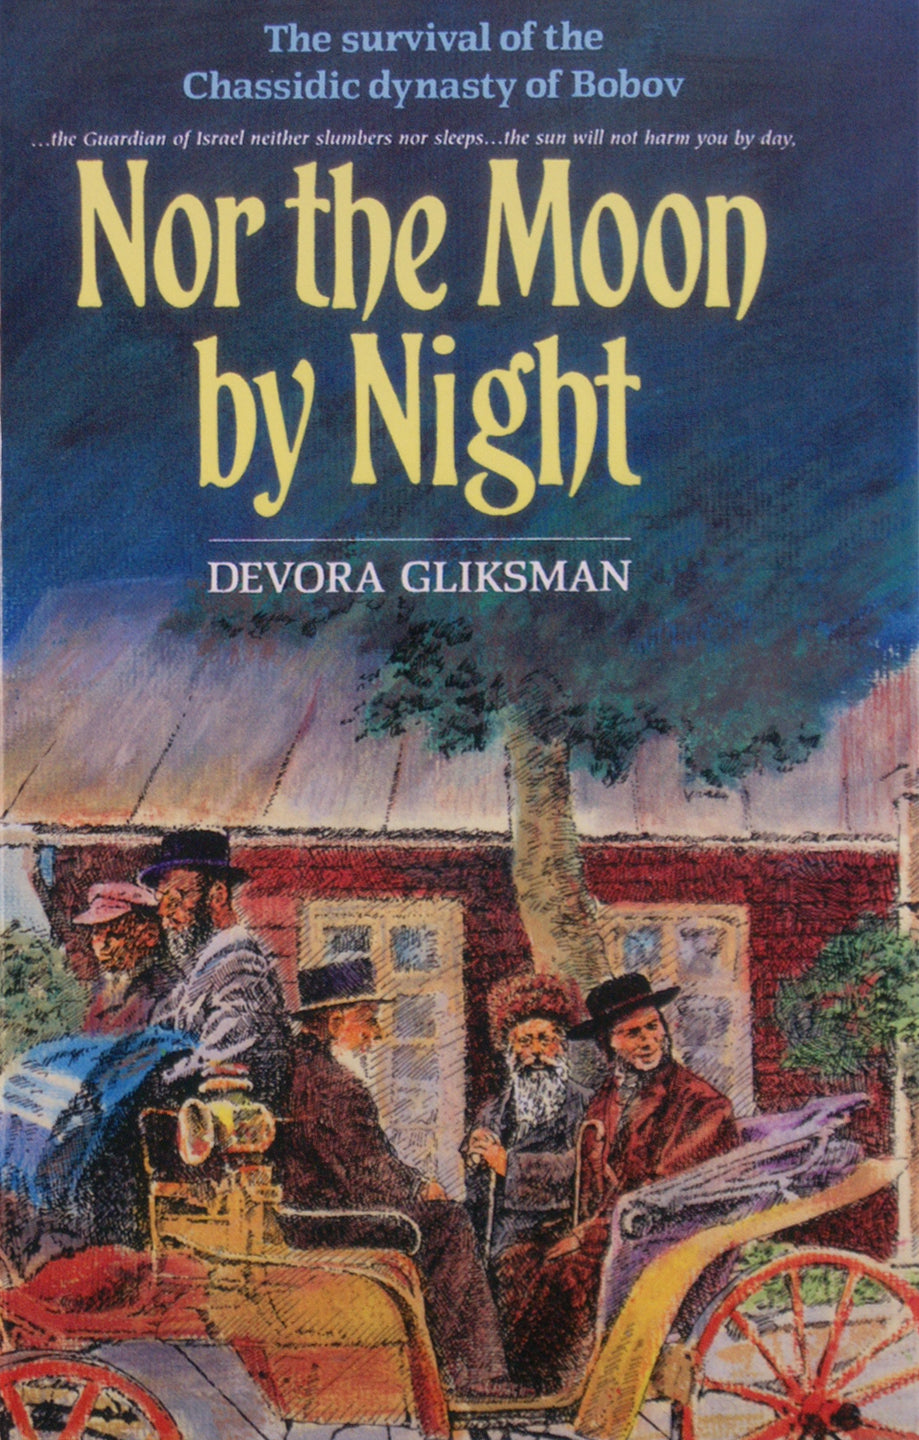 Nor the Moon by Night - The Survival of the Chassidic Dynasty of Bobov